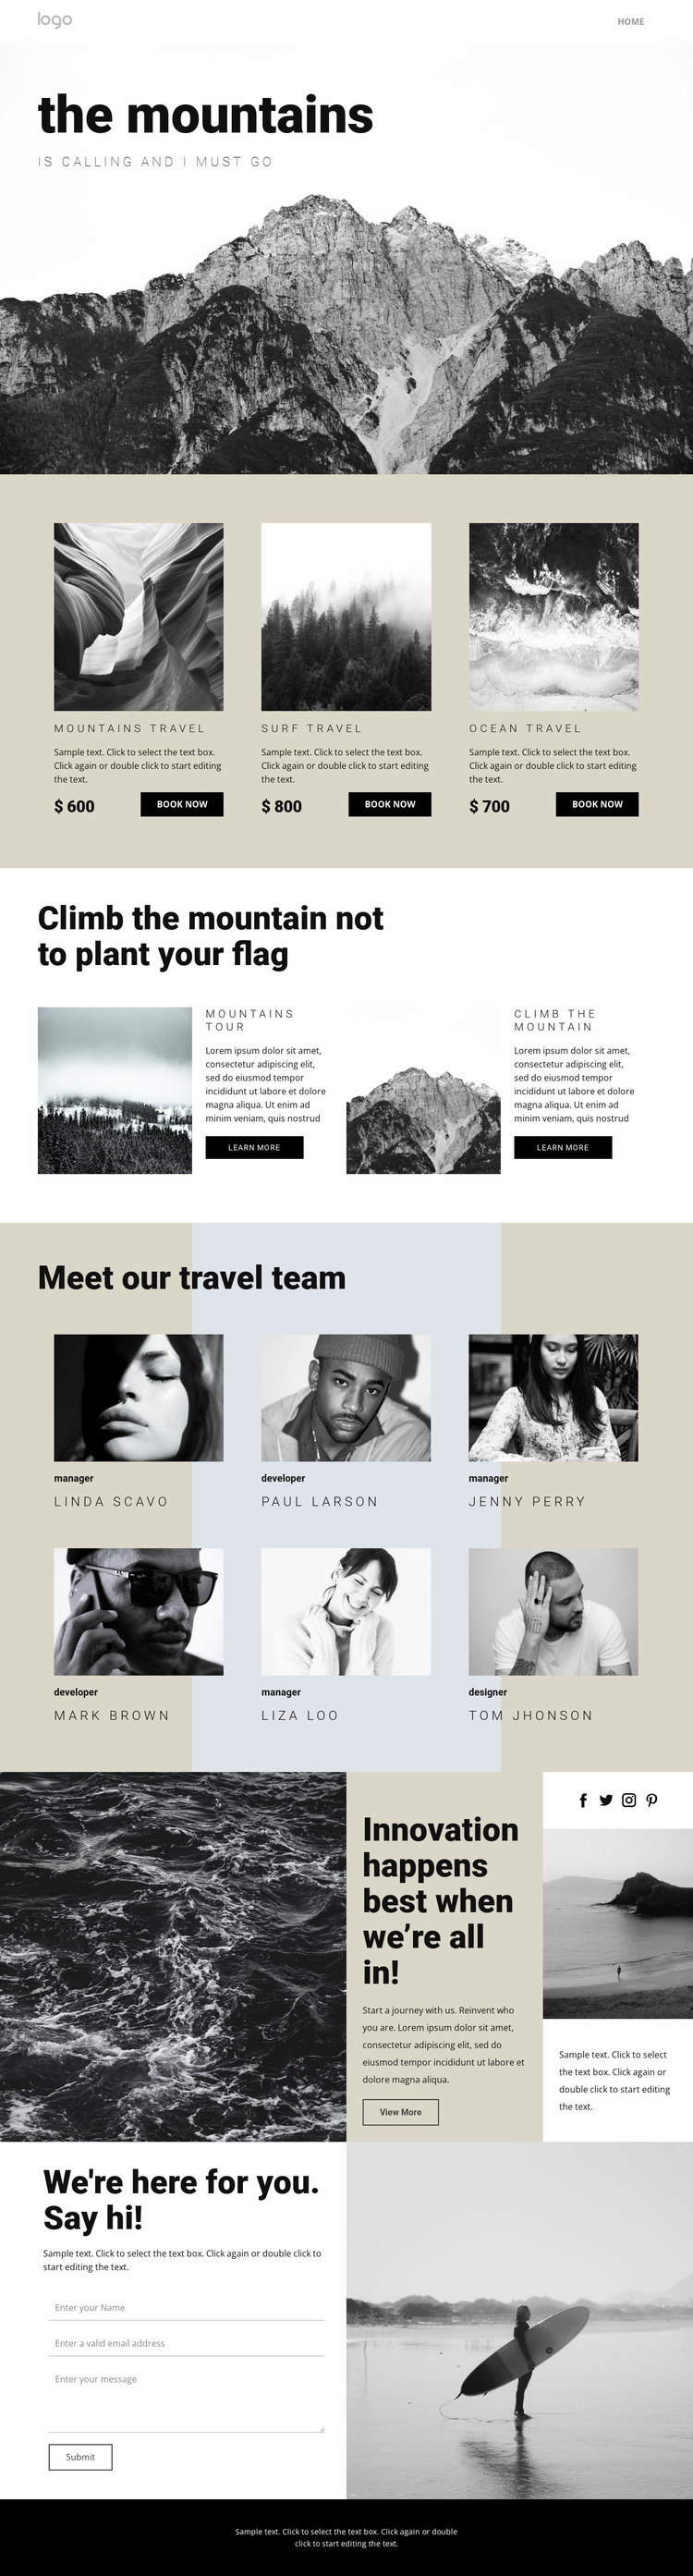 Agency for people who travel Website Mockup